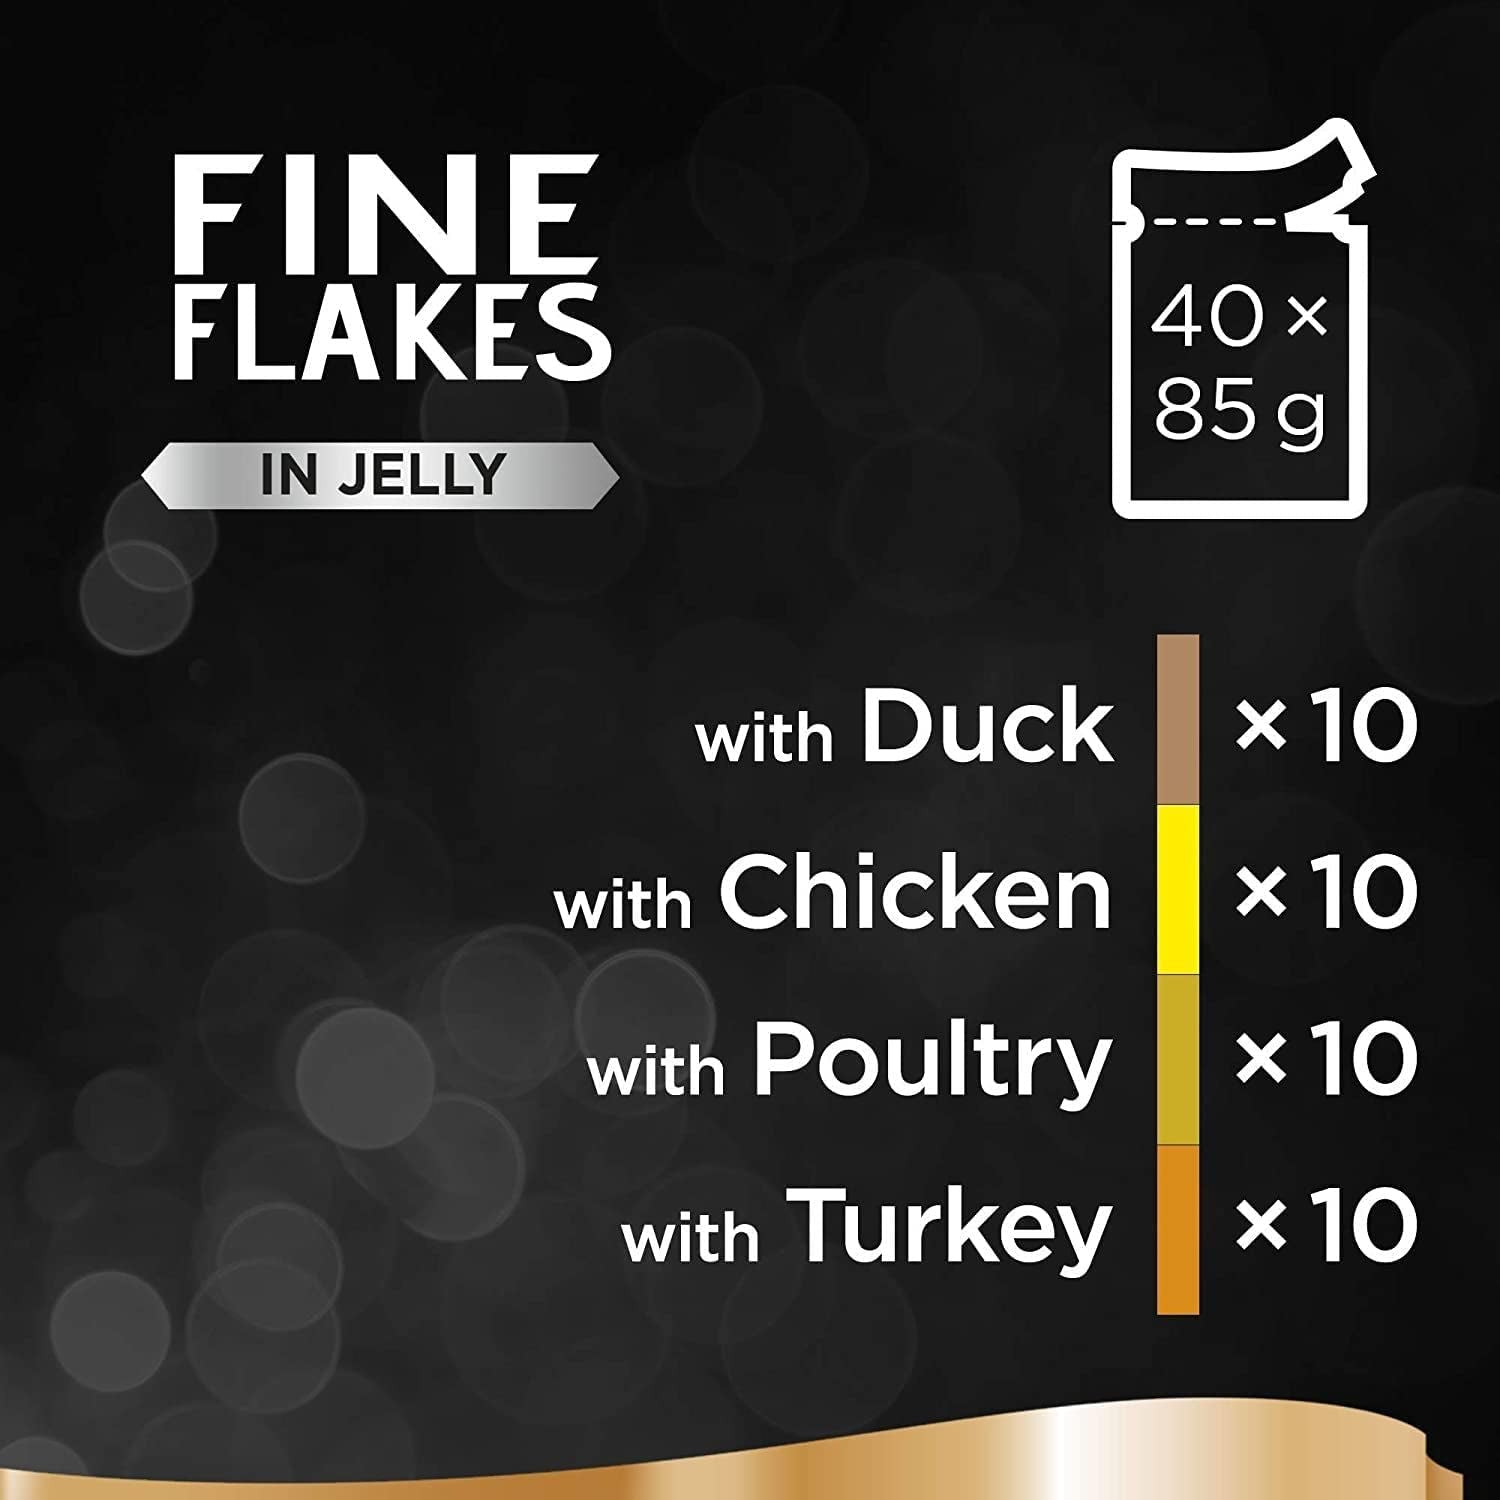 Fine Flakes Poultry Collection in Jelly 40 Pouches, Adult Wet Cat Food, Megapack , 85 G (Pack of 40)